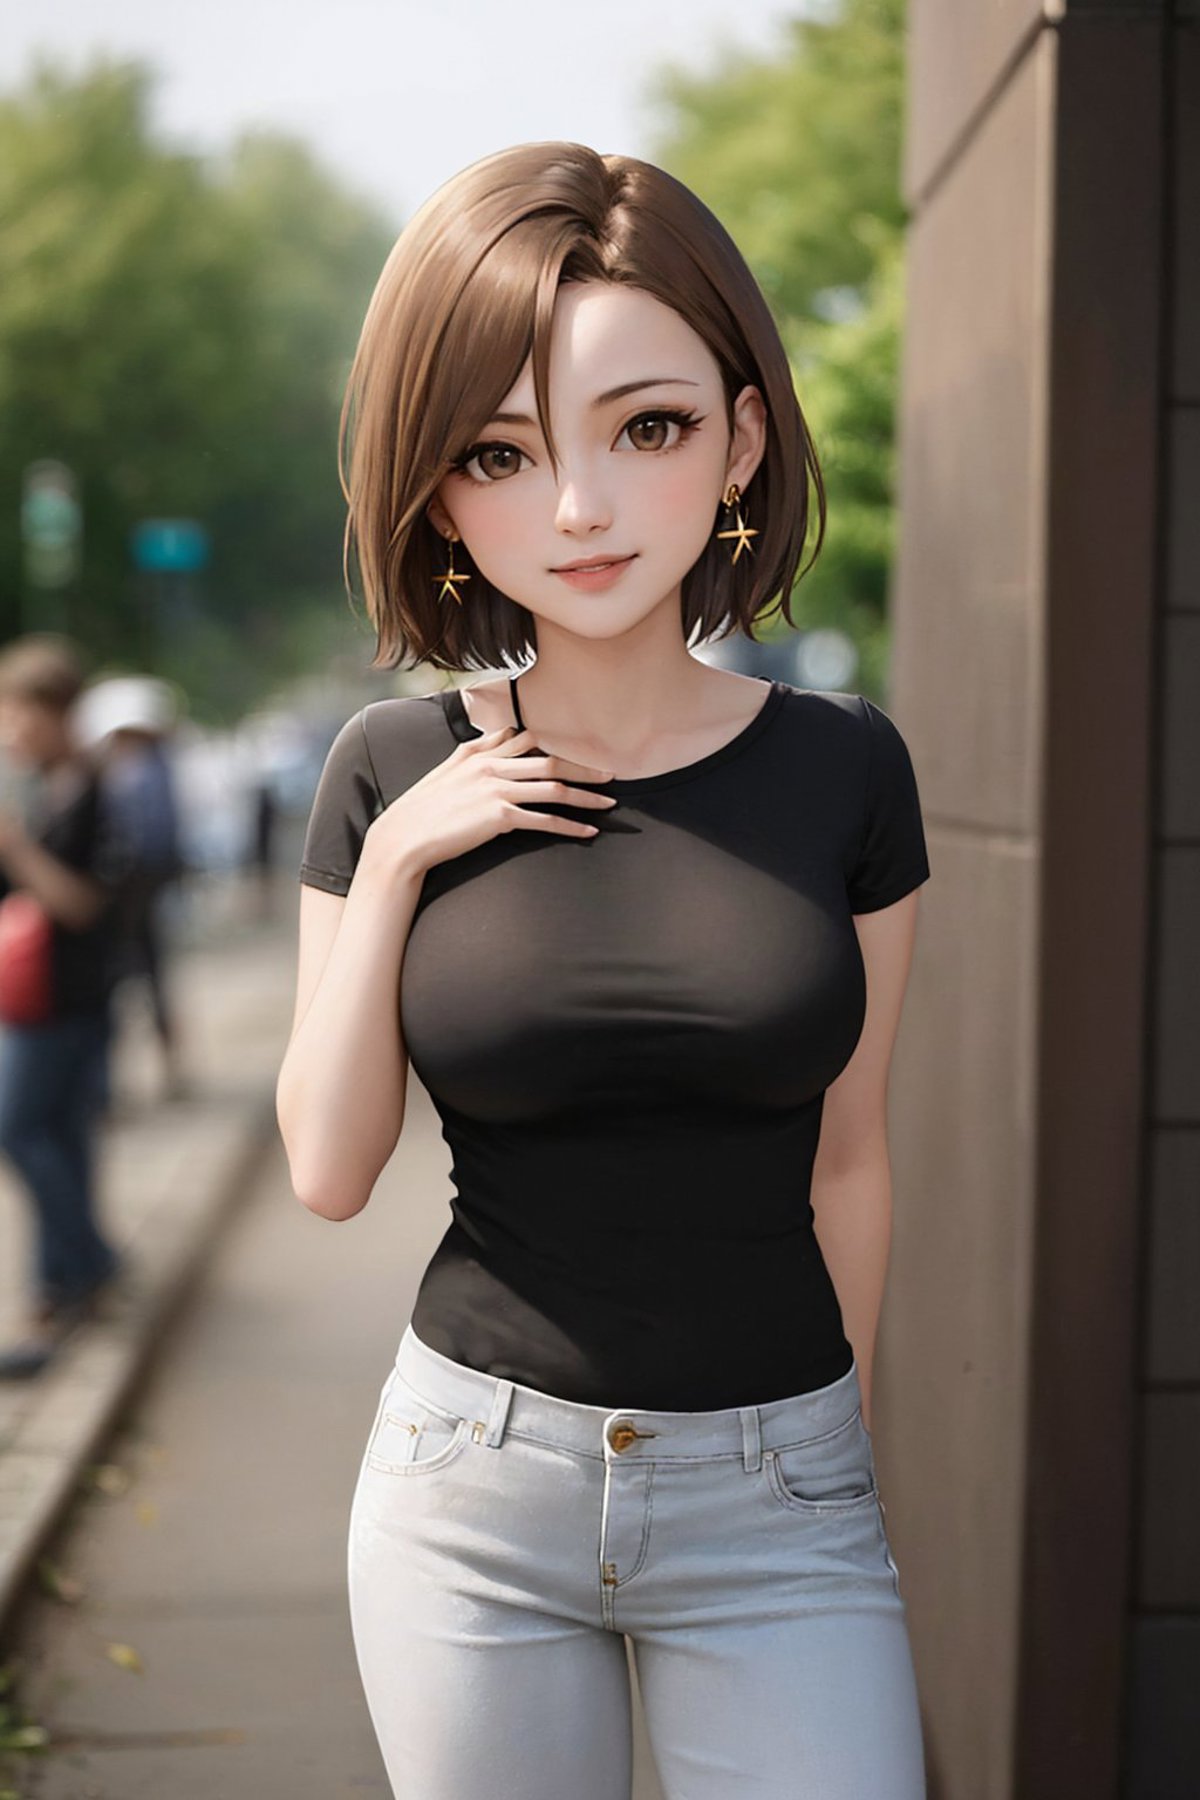 AI model image by justTNP